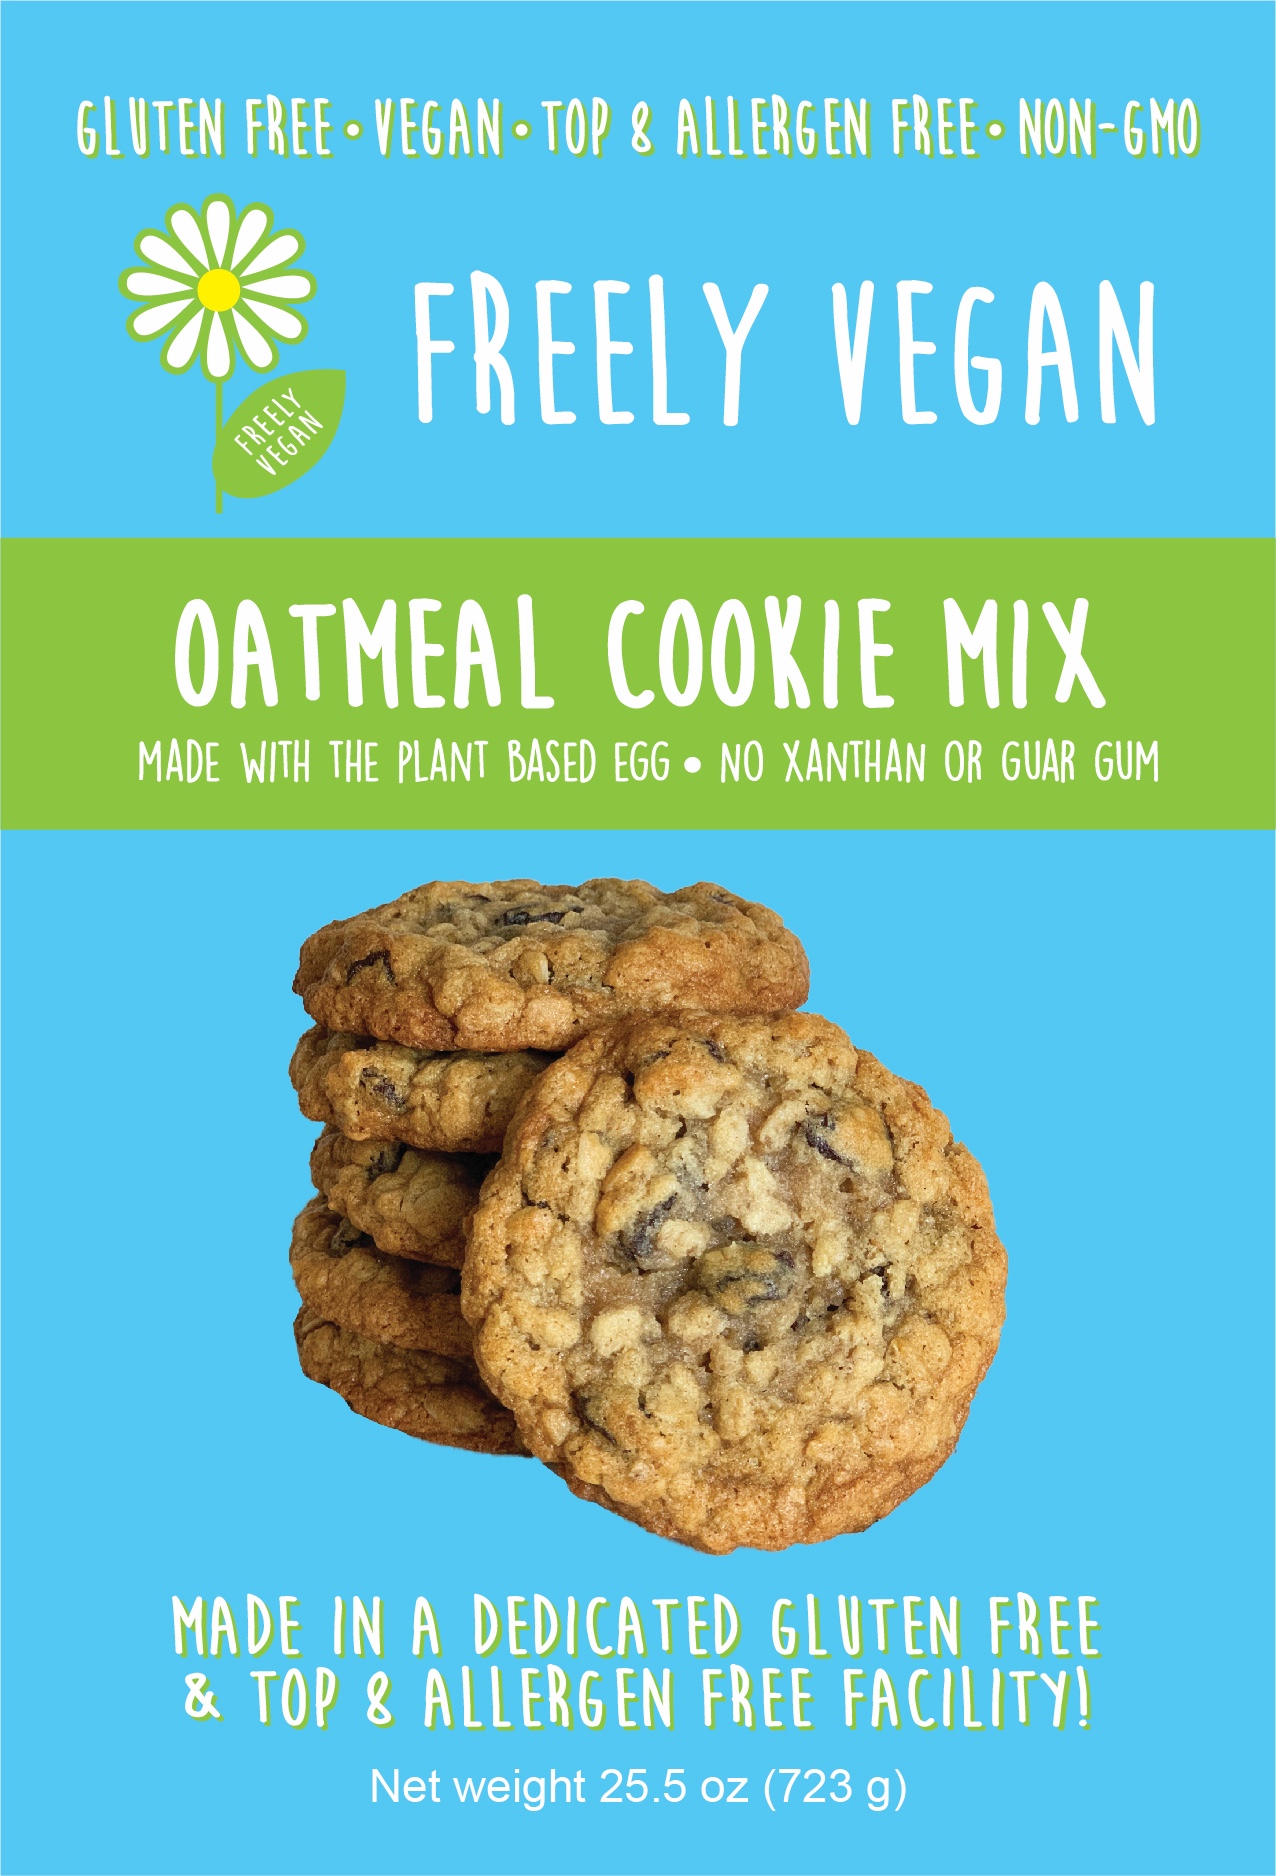 Oatmeal Cookie Mix - Freely Vegan